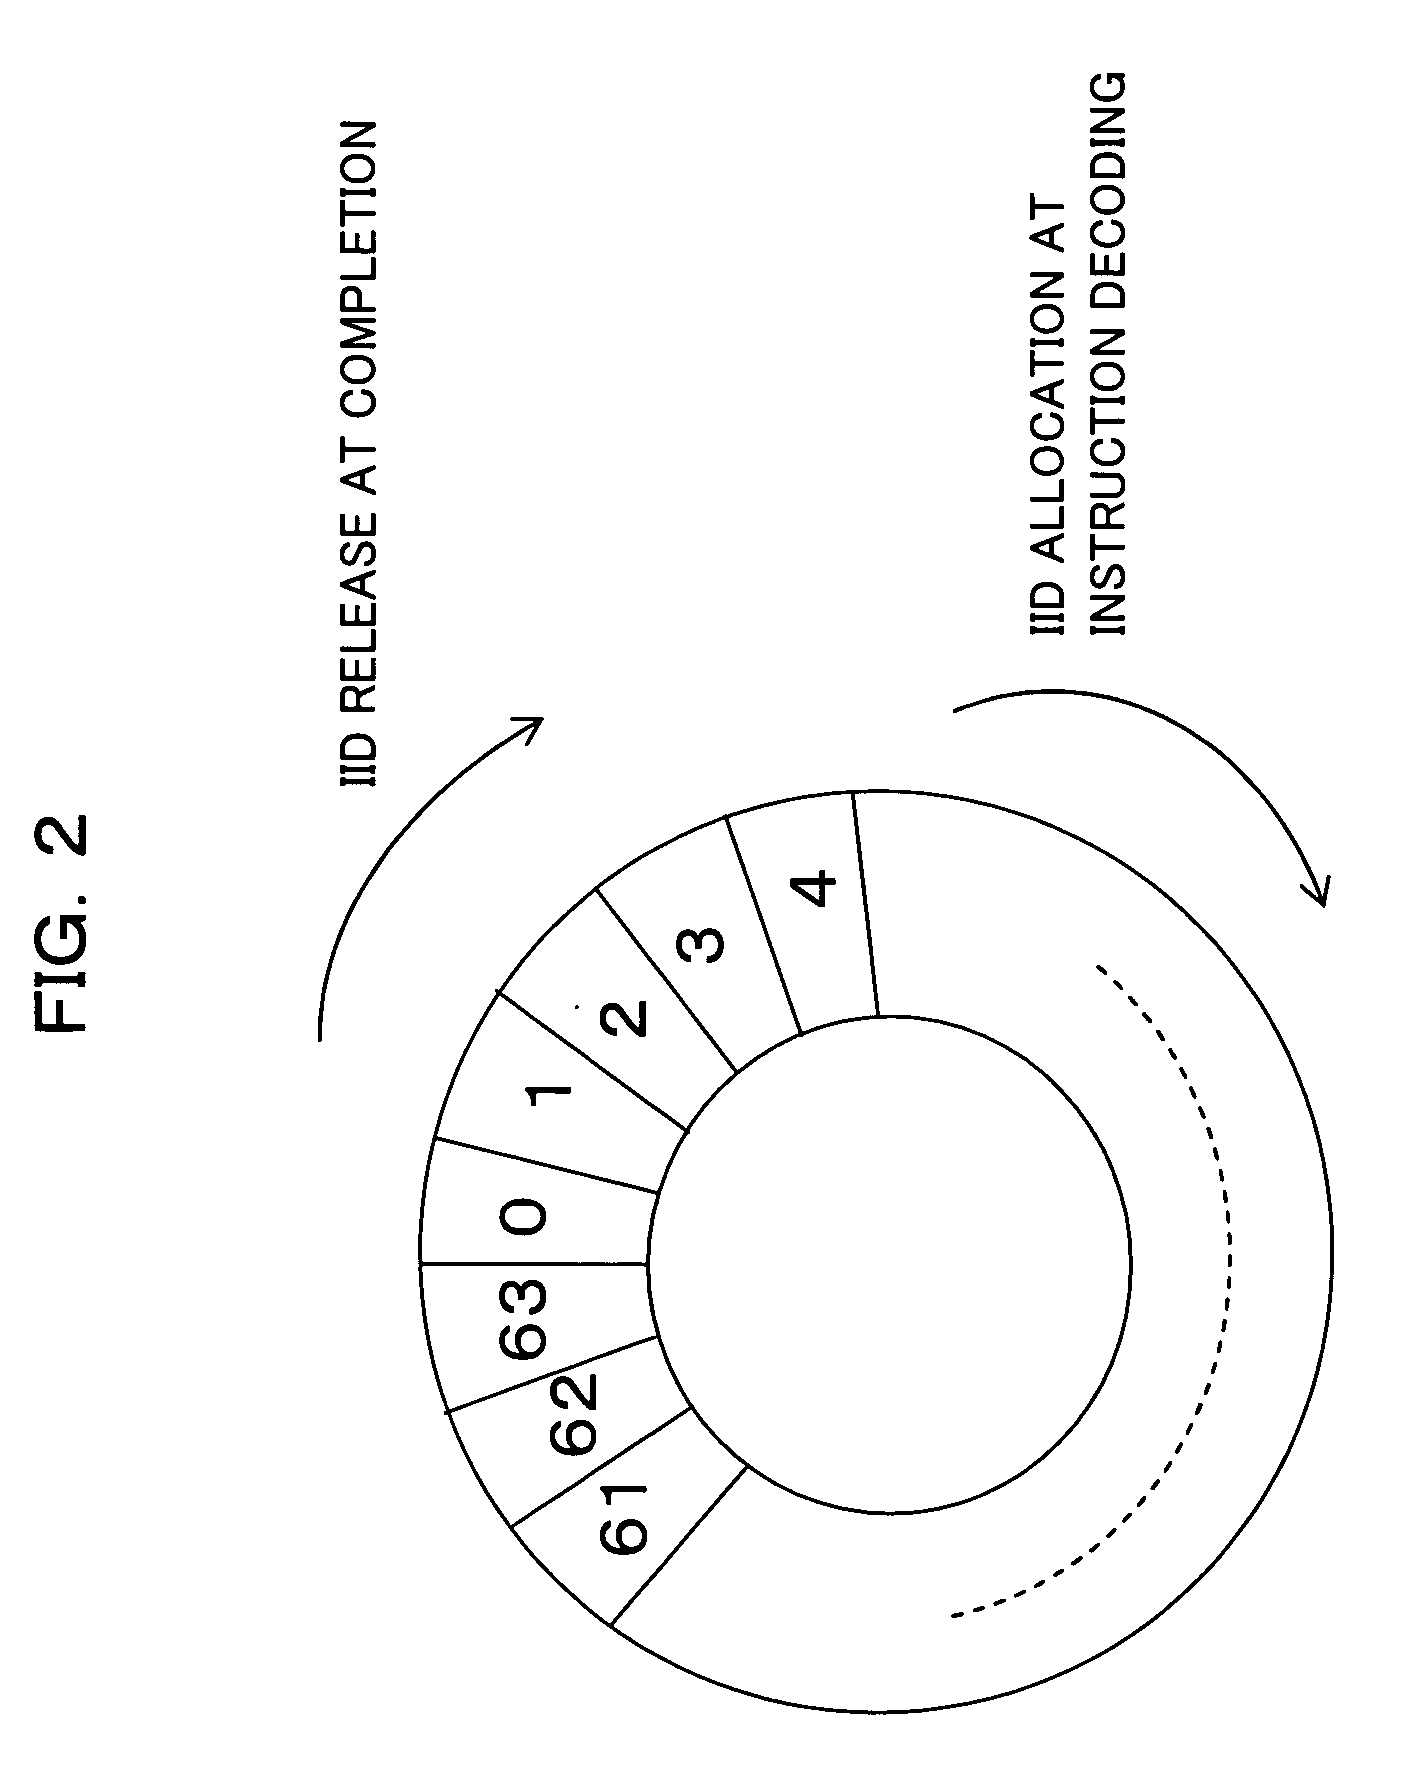 Multithread processor and thread switching control method